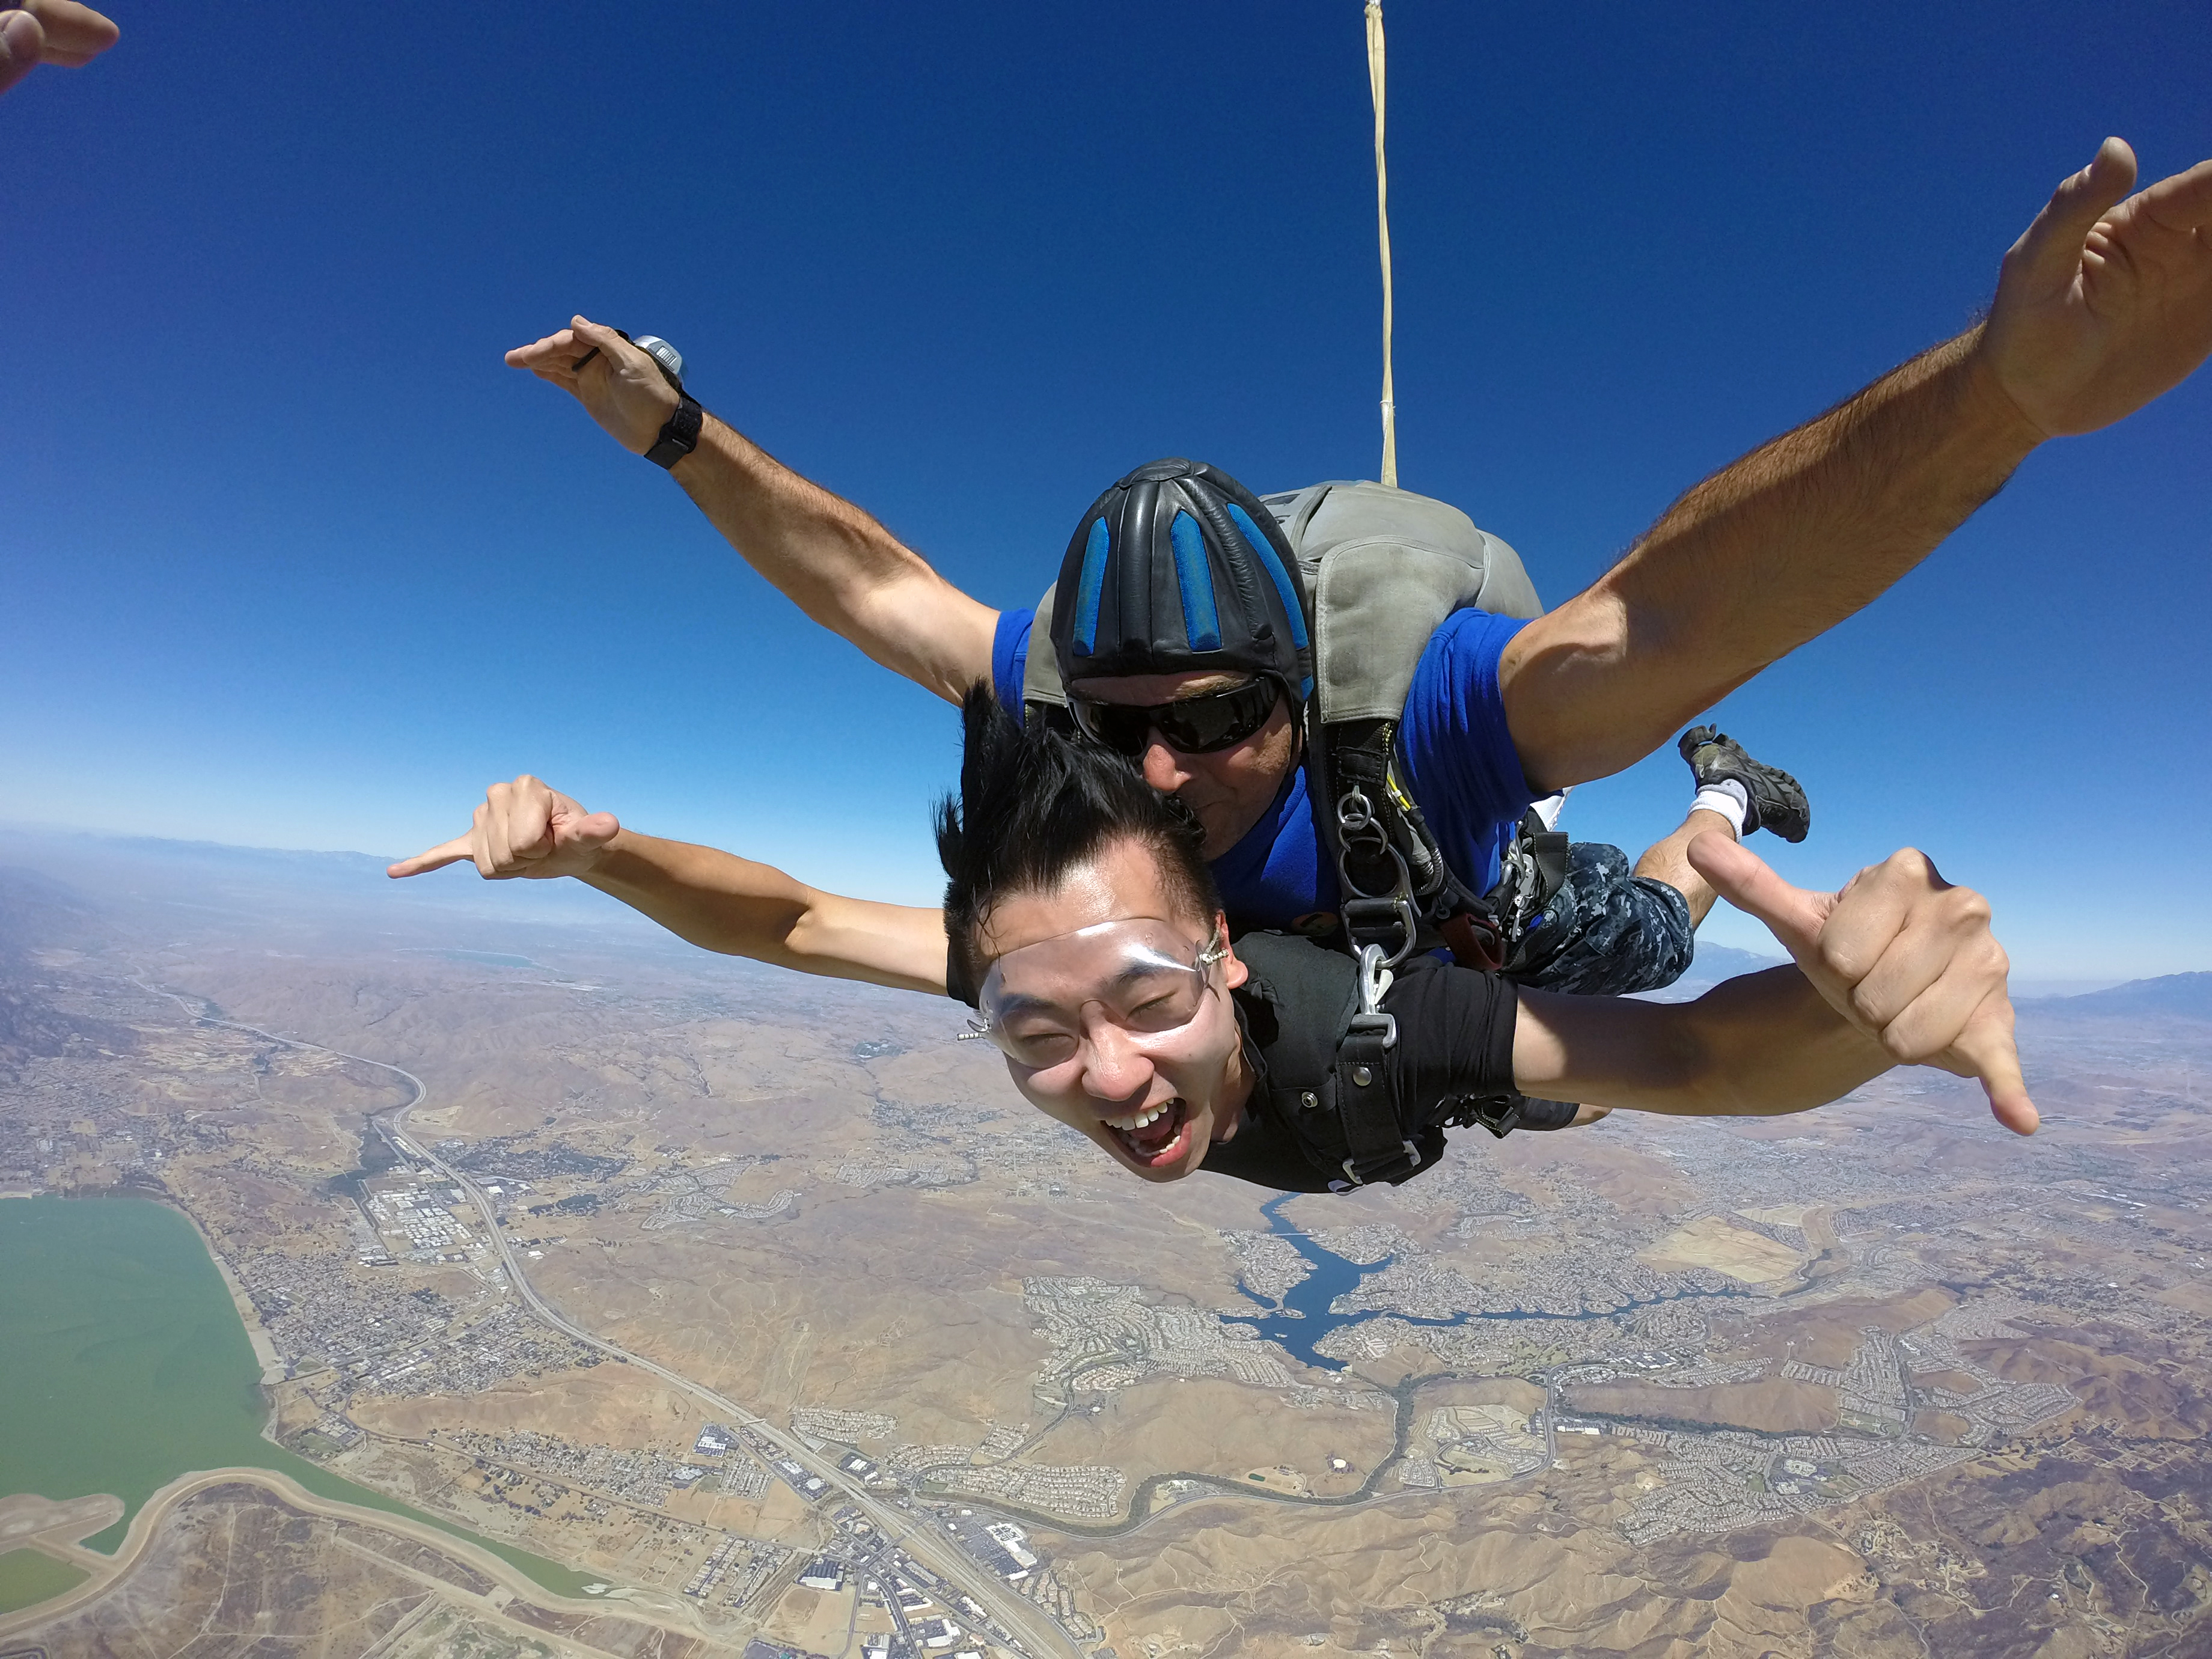 Skydive Near San Diego and Los Angeles, CA | Skydive Elsinore